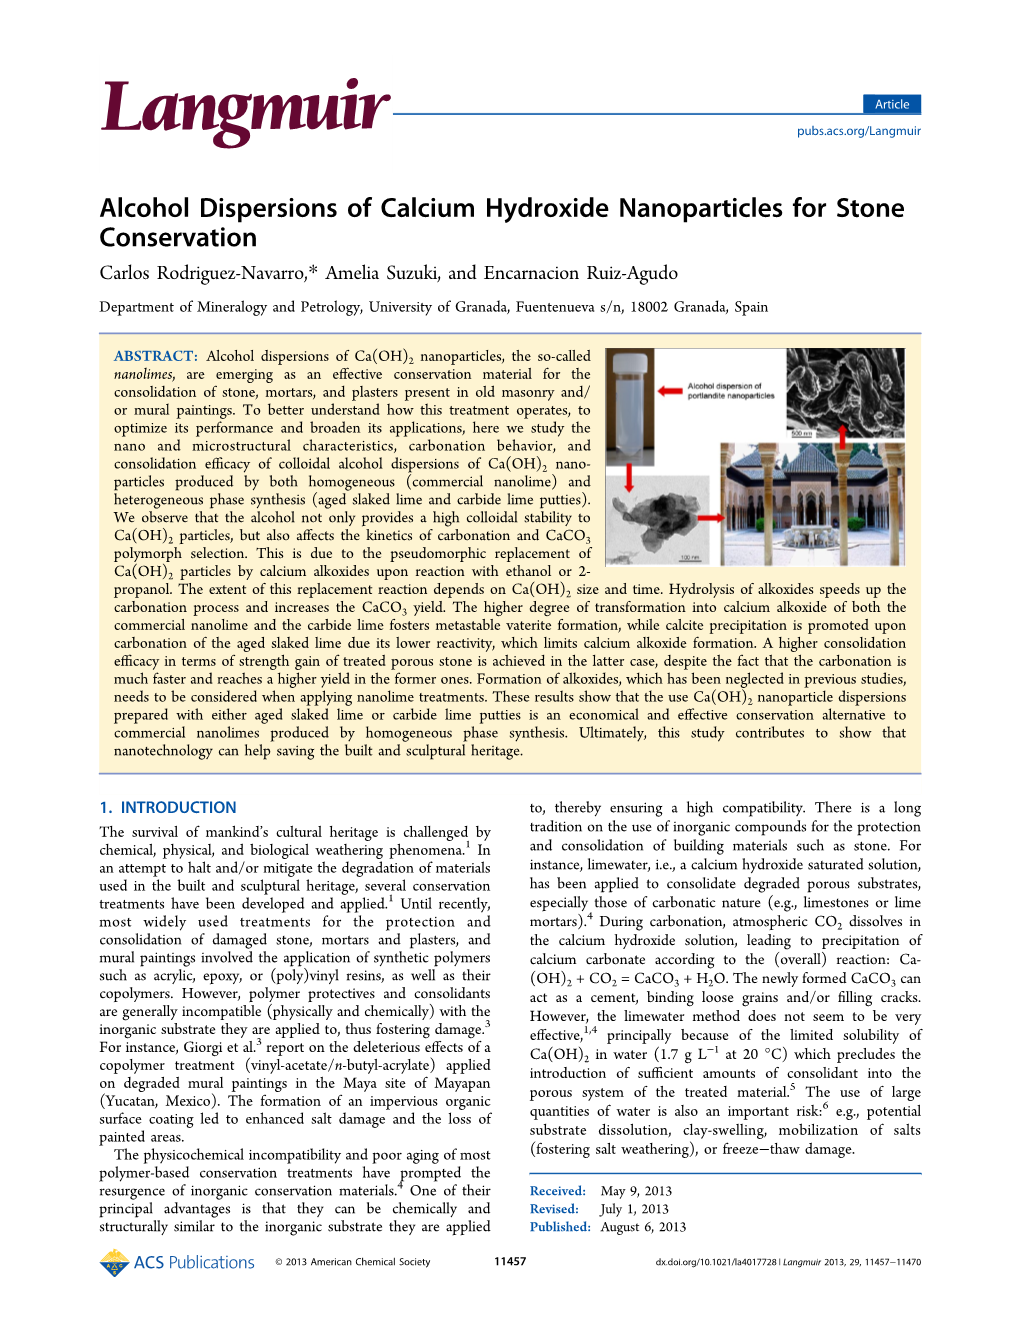 Alcohol Dispersions of Calcium Hydroxide Nanoparticles for Stone